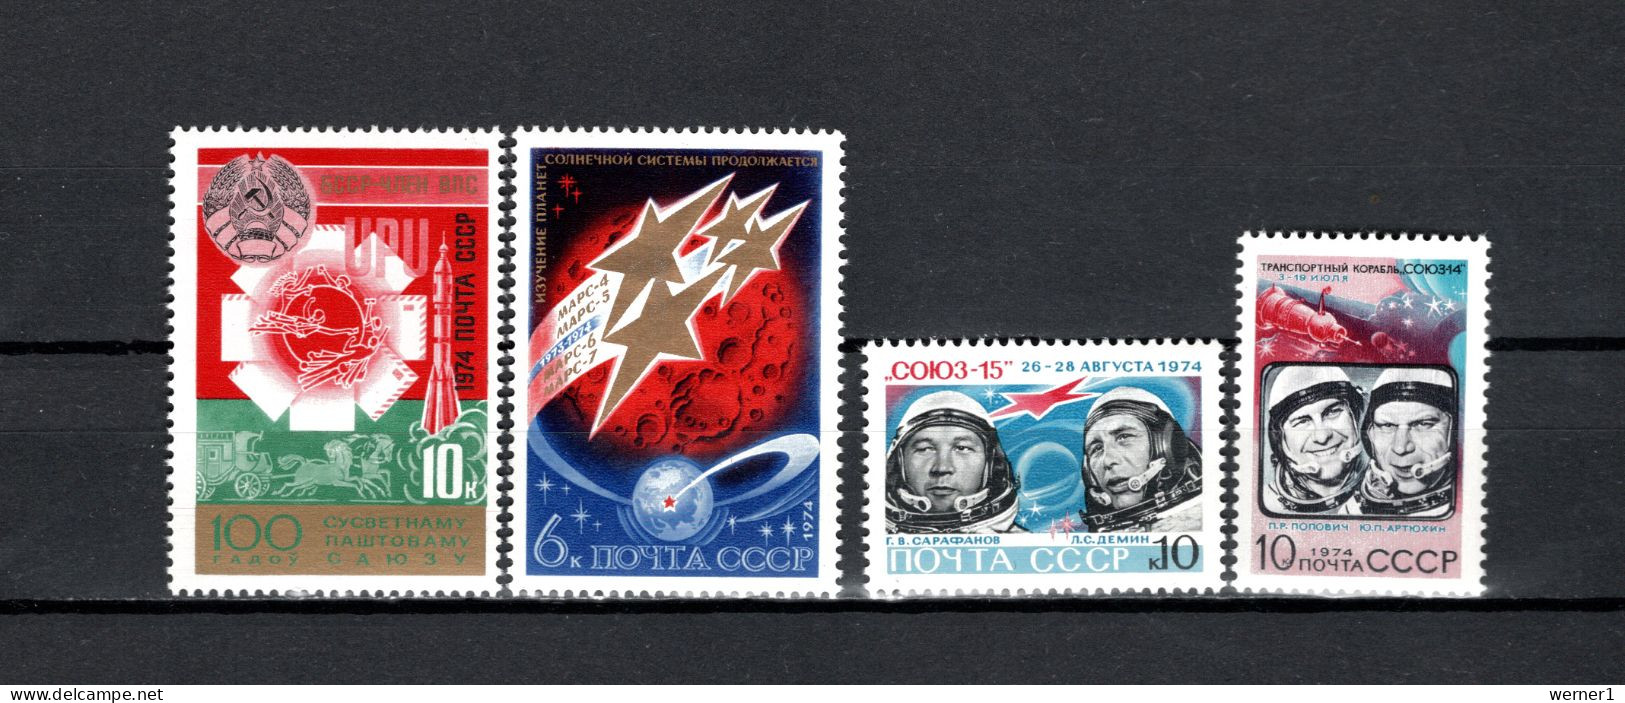 USSR Russia 1974 Space, UPU Centenary, Space Achievement, Soyuz 14 And 15, 4 Stamps MNH - Russie & URSS